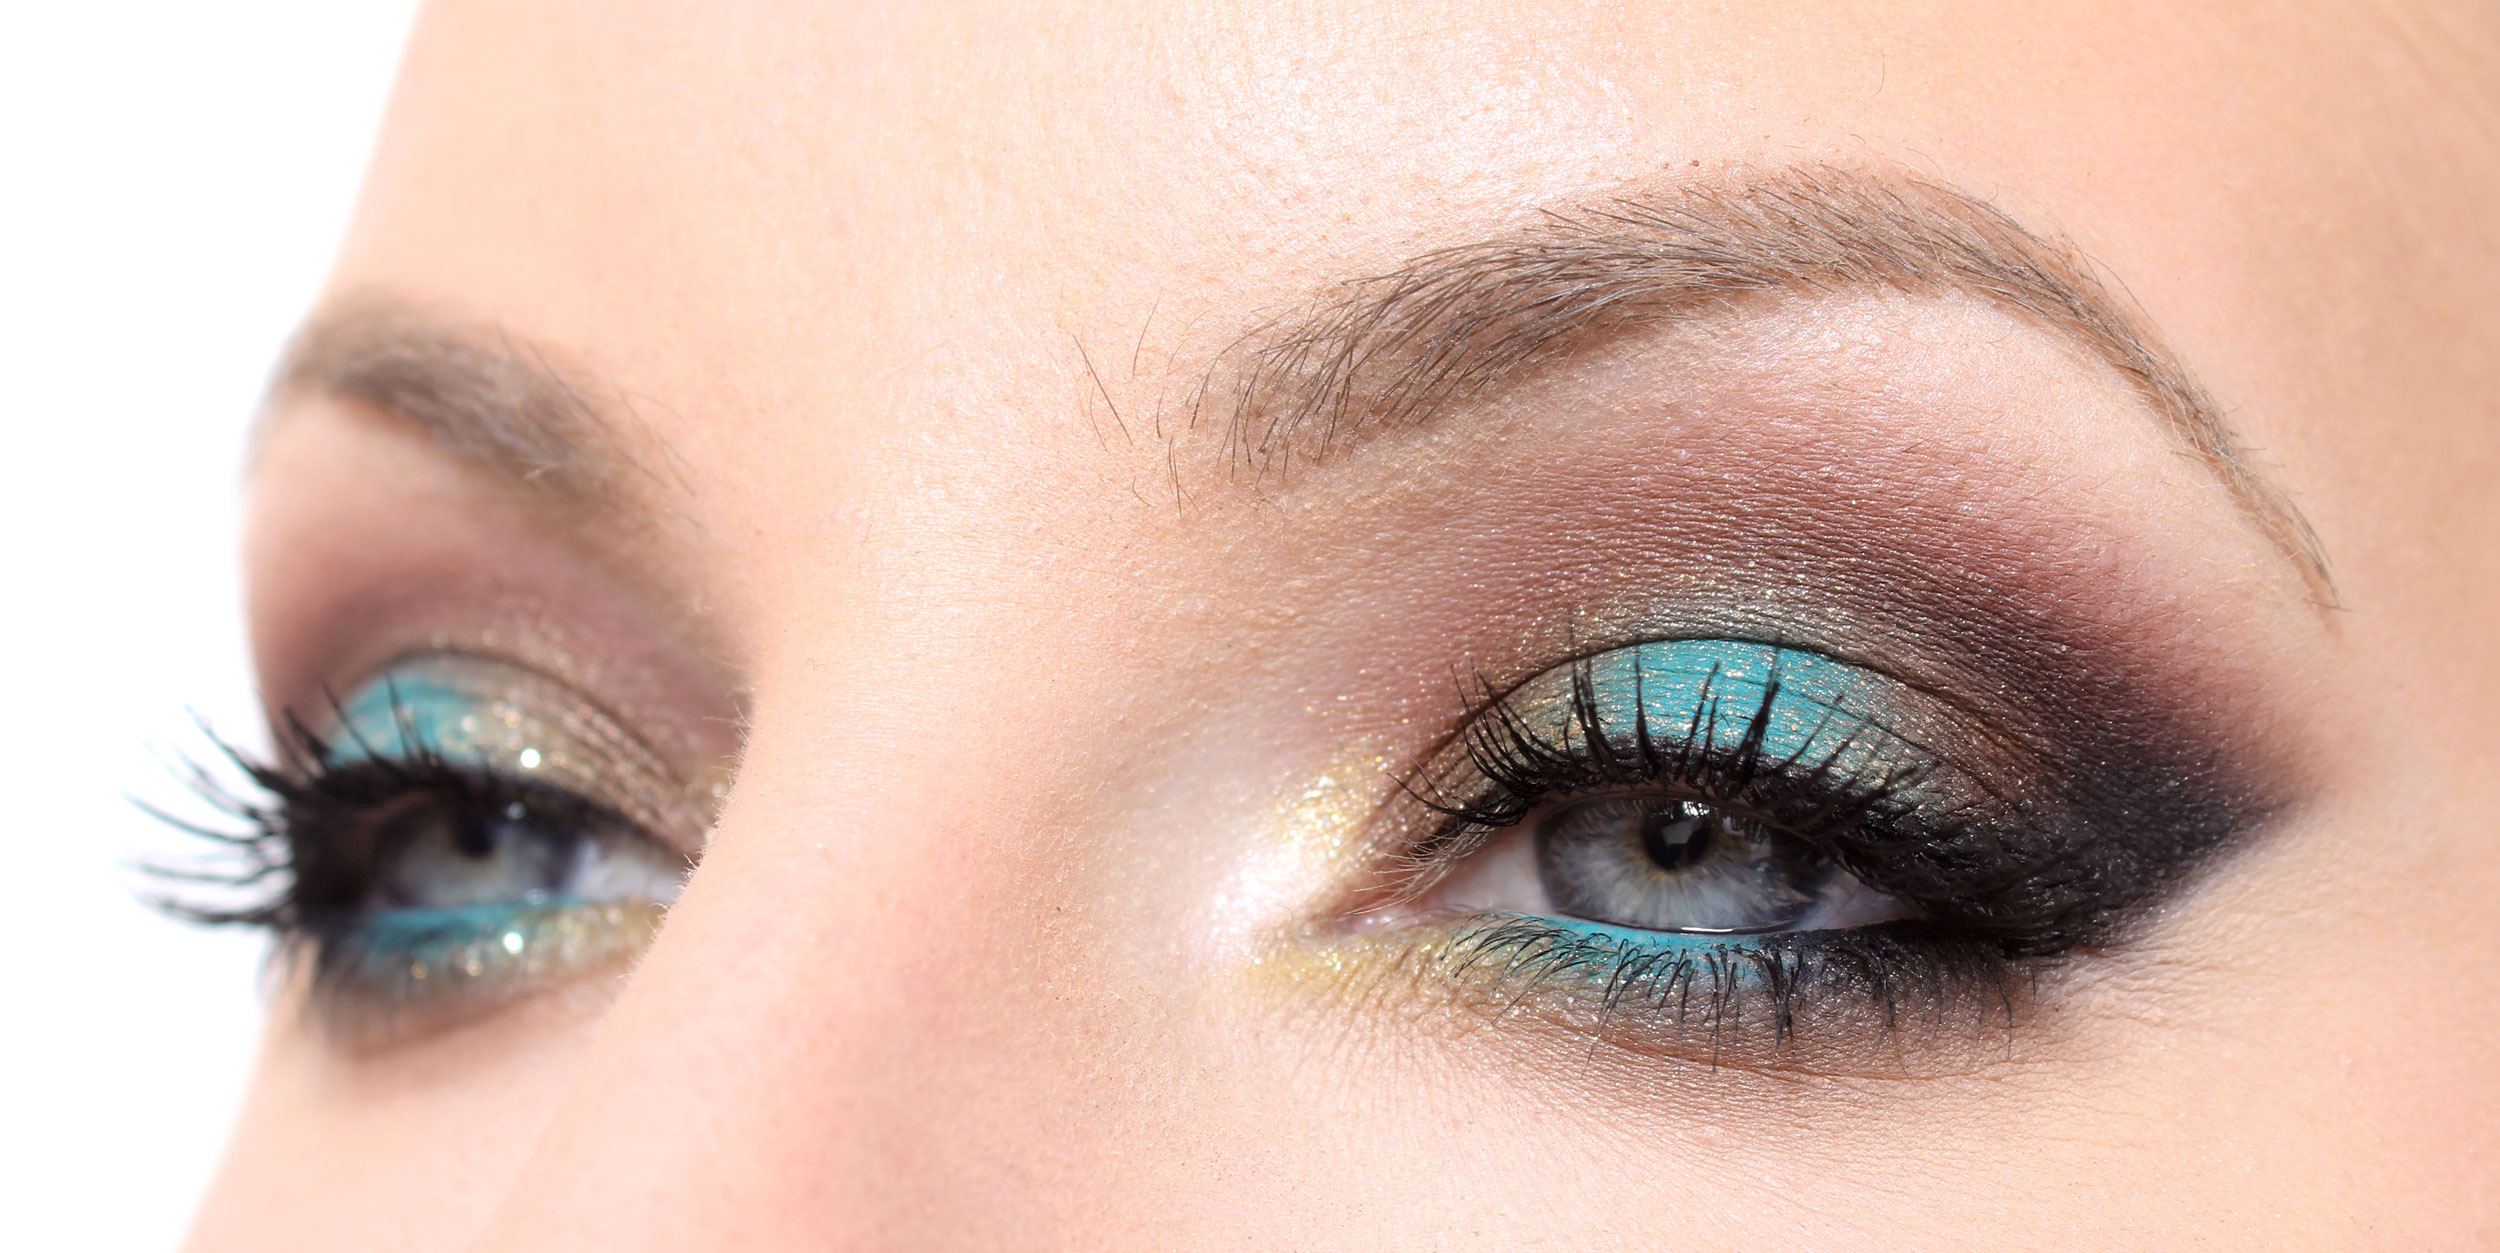 Sooted eyes in turquoise and gold (Vintage make-up)